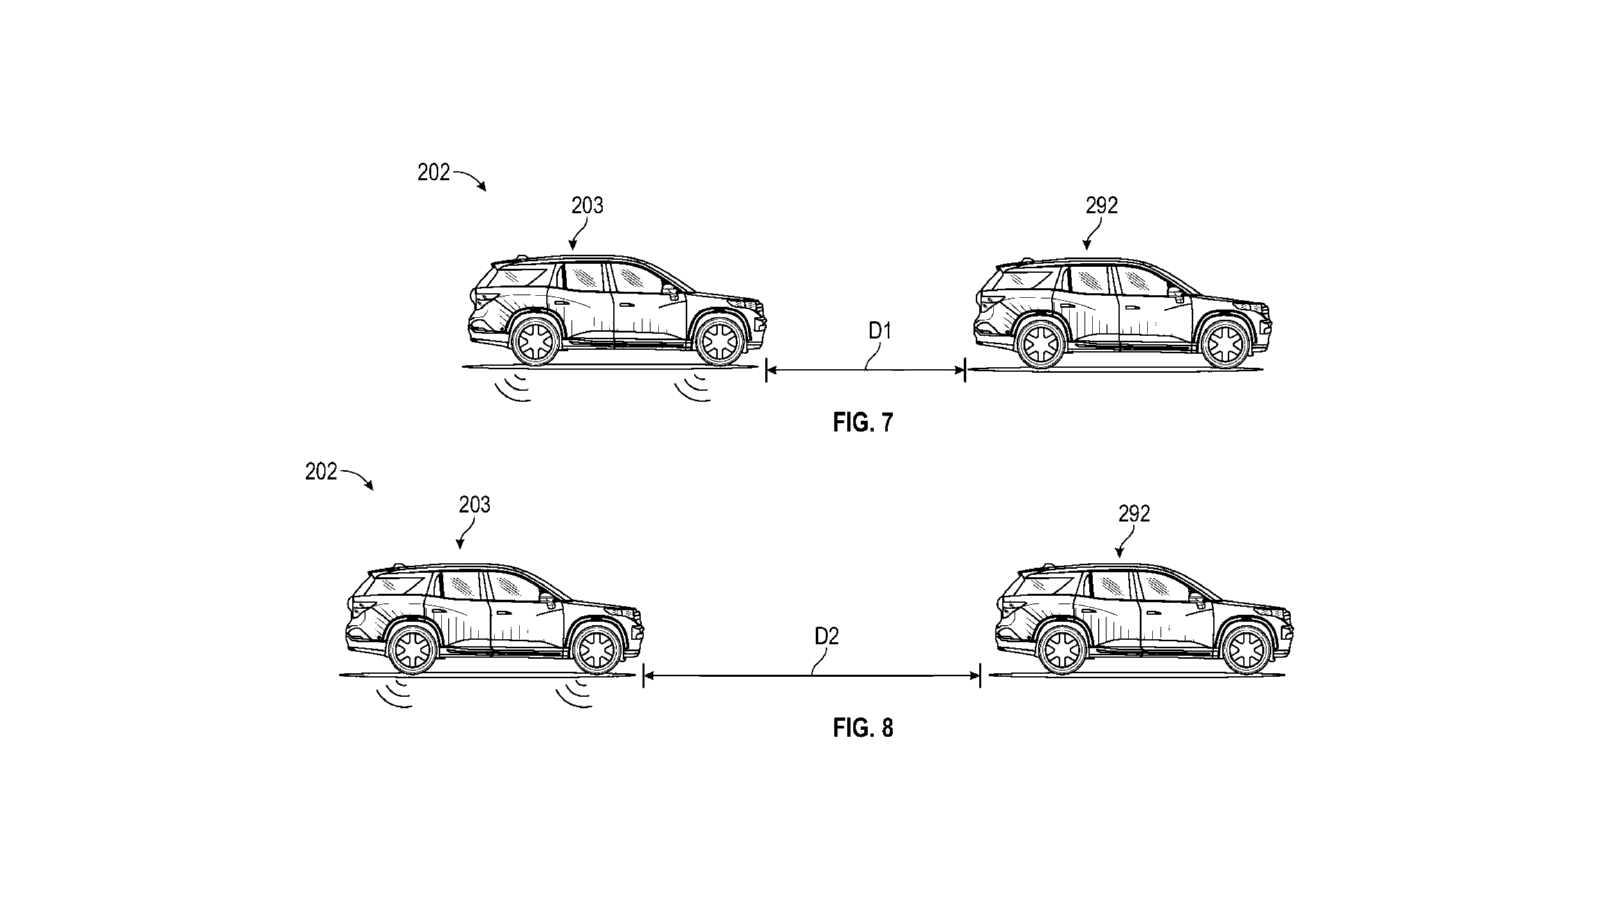 Ford TPMS Patent Sketch